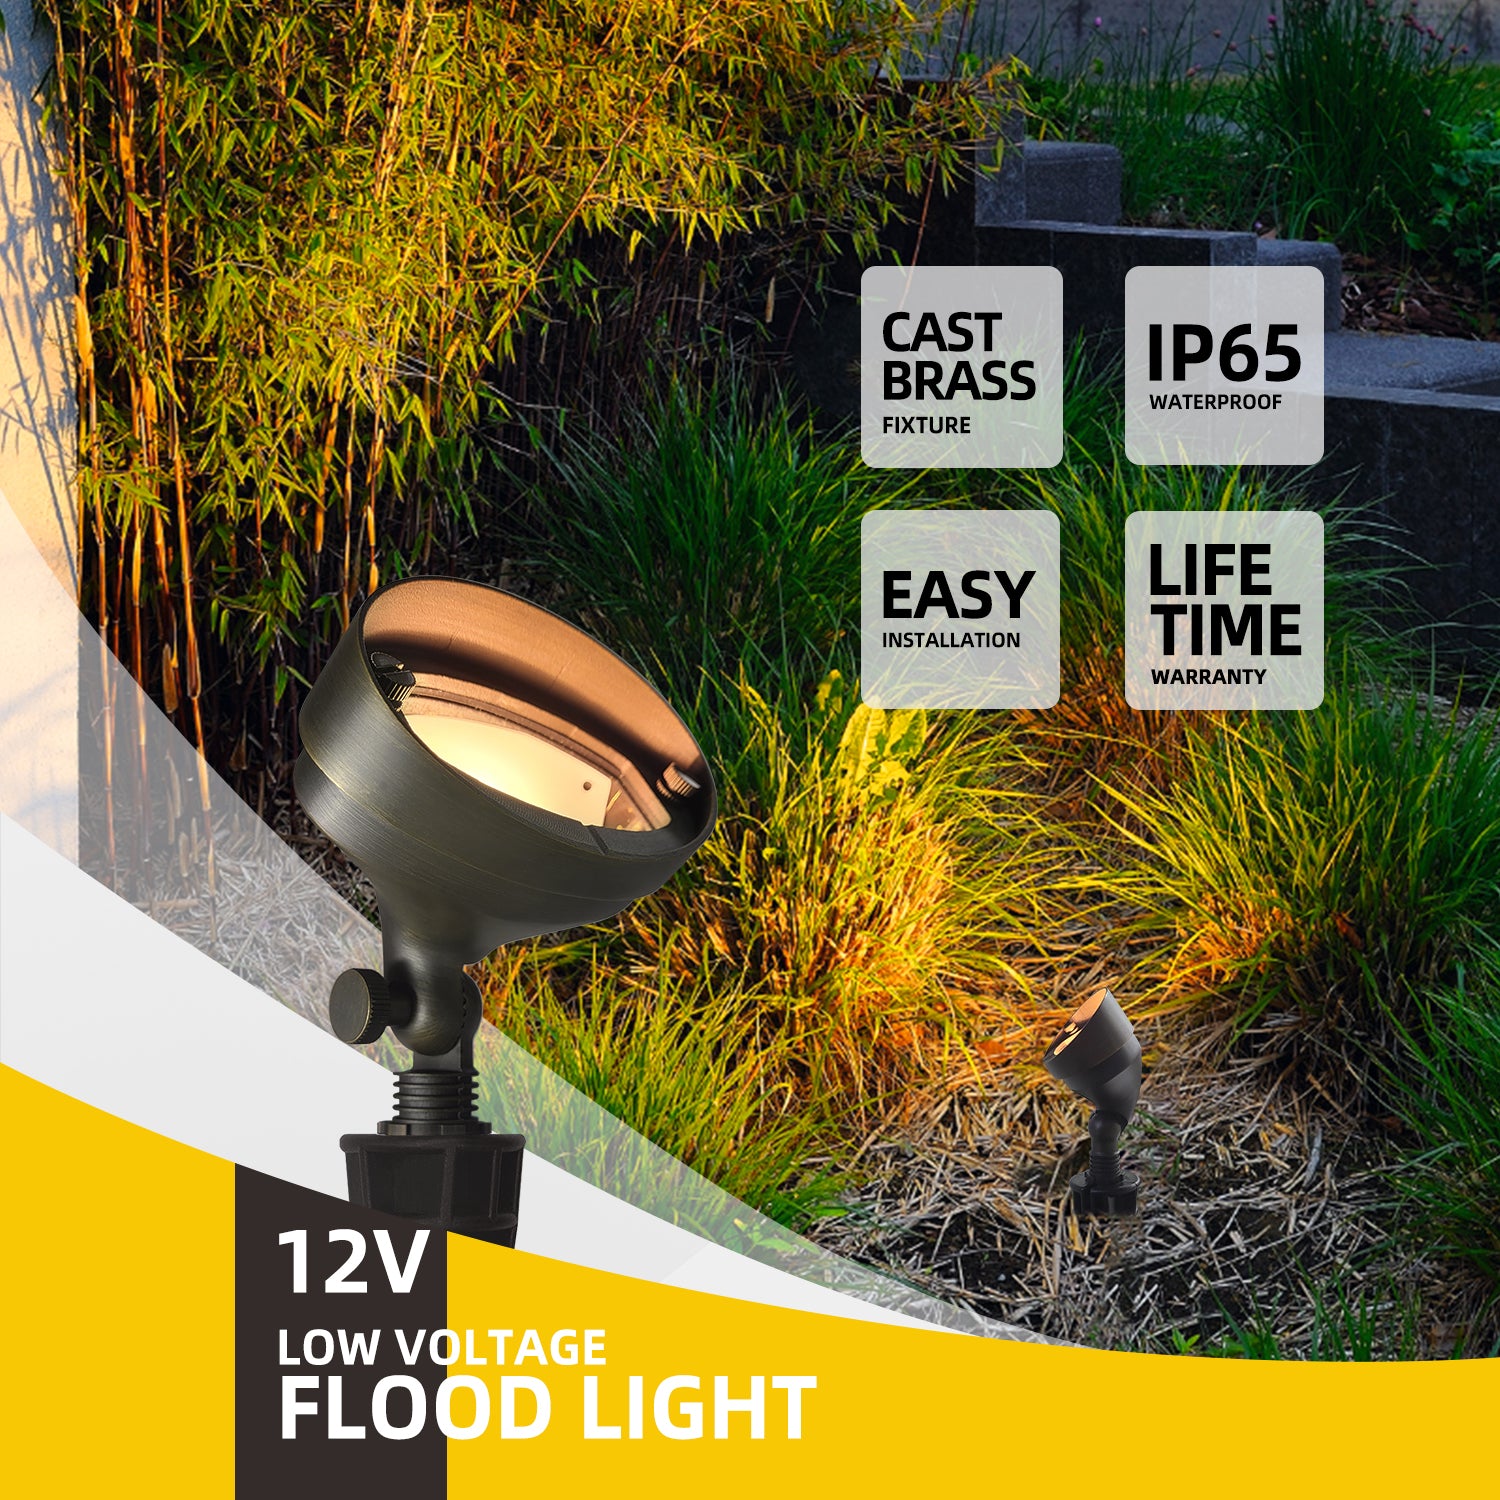 Brass oval flood light with a cast brass fixture, IP65 waterproof rating, easily installs, and comes with a lifetime warranty. Illuminates garden landscape.